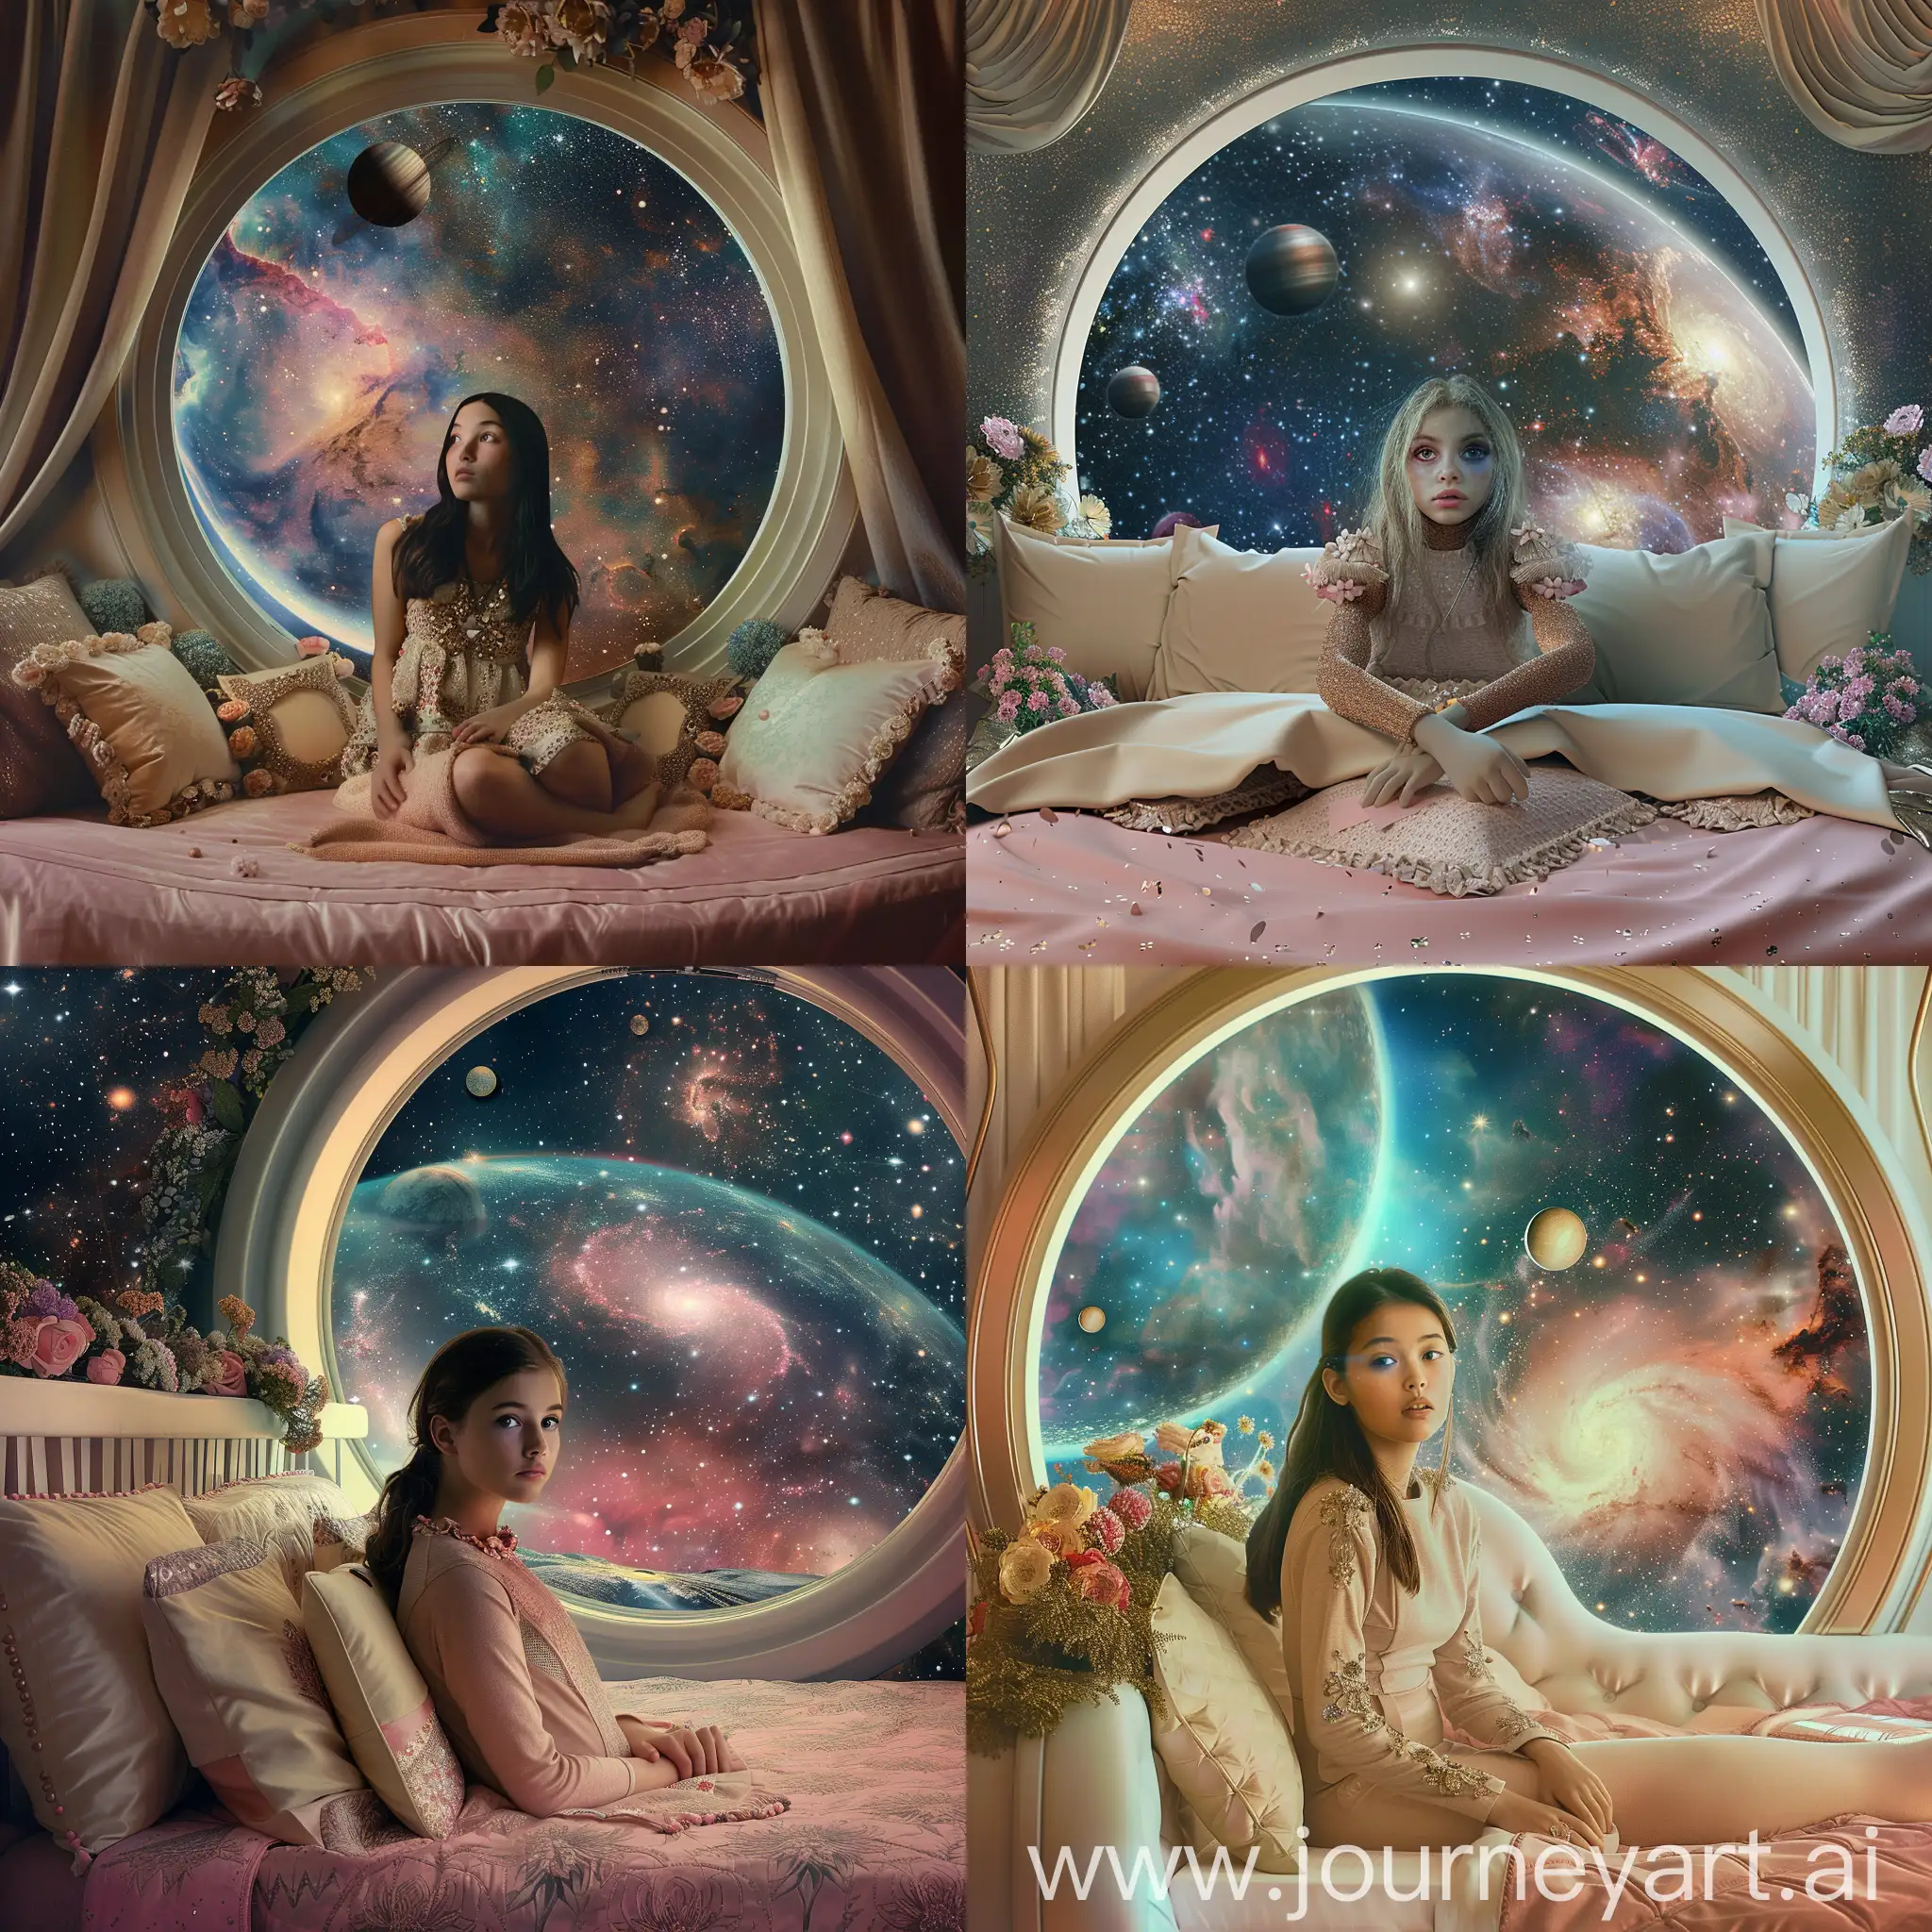 A beautiful girl with highly detailed facial features. She is sitting on a modern bed with a pink duvet cover, cream cushions and flowers around the headboard. She is looking out of a large round window. Outside the window is outer space with stars, nebula and planets. Sci fi. Photographic